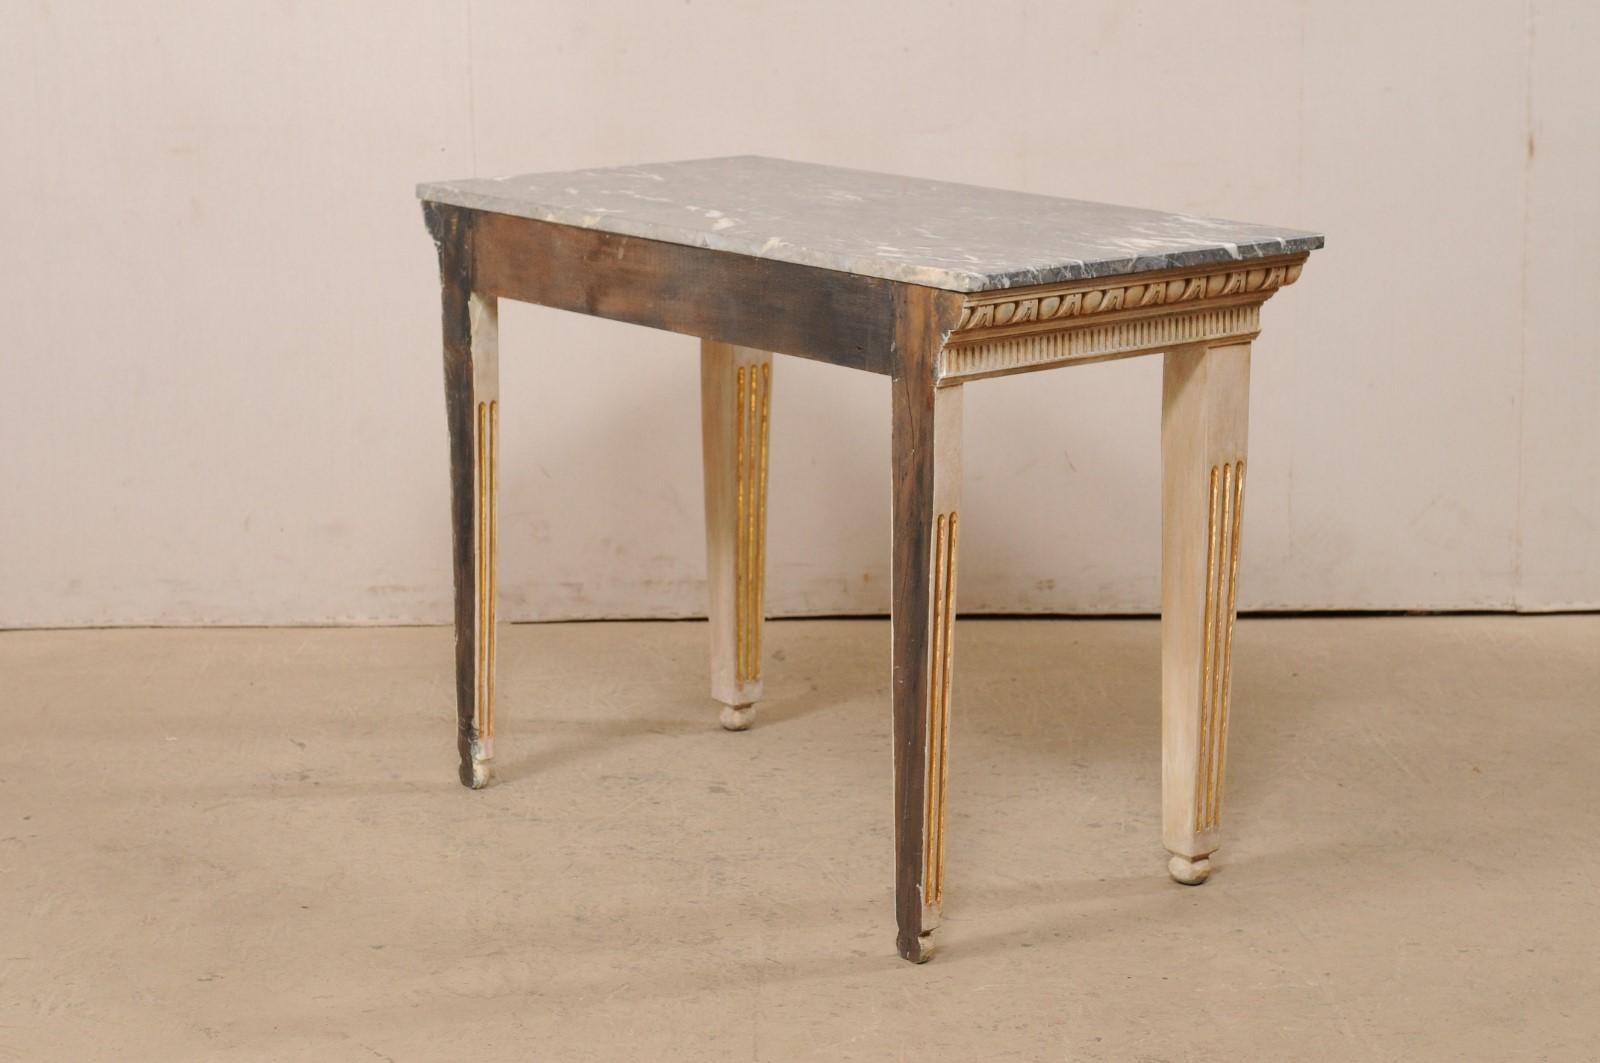 20th Century Vintage Marble-Top Console Table with Egg-n-Dart & Fluted Carved Embellishments